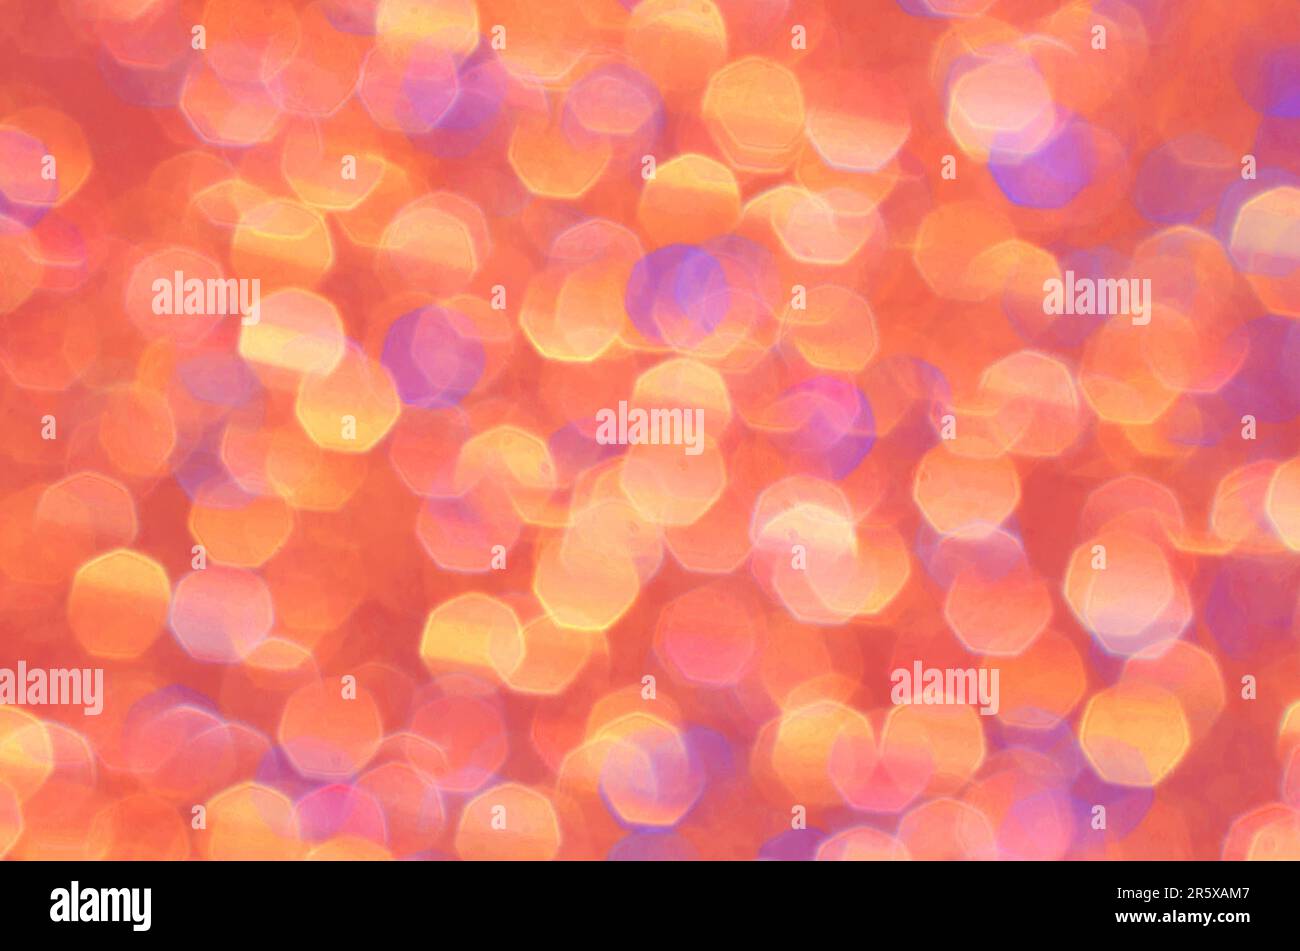 Orange, yellow, gold and purple abstract background. Bright sparkle and glow of brilliant color for festive backdrop. Beautiful pastel pattern, cheerf Stock Photo